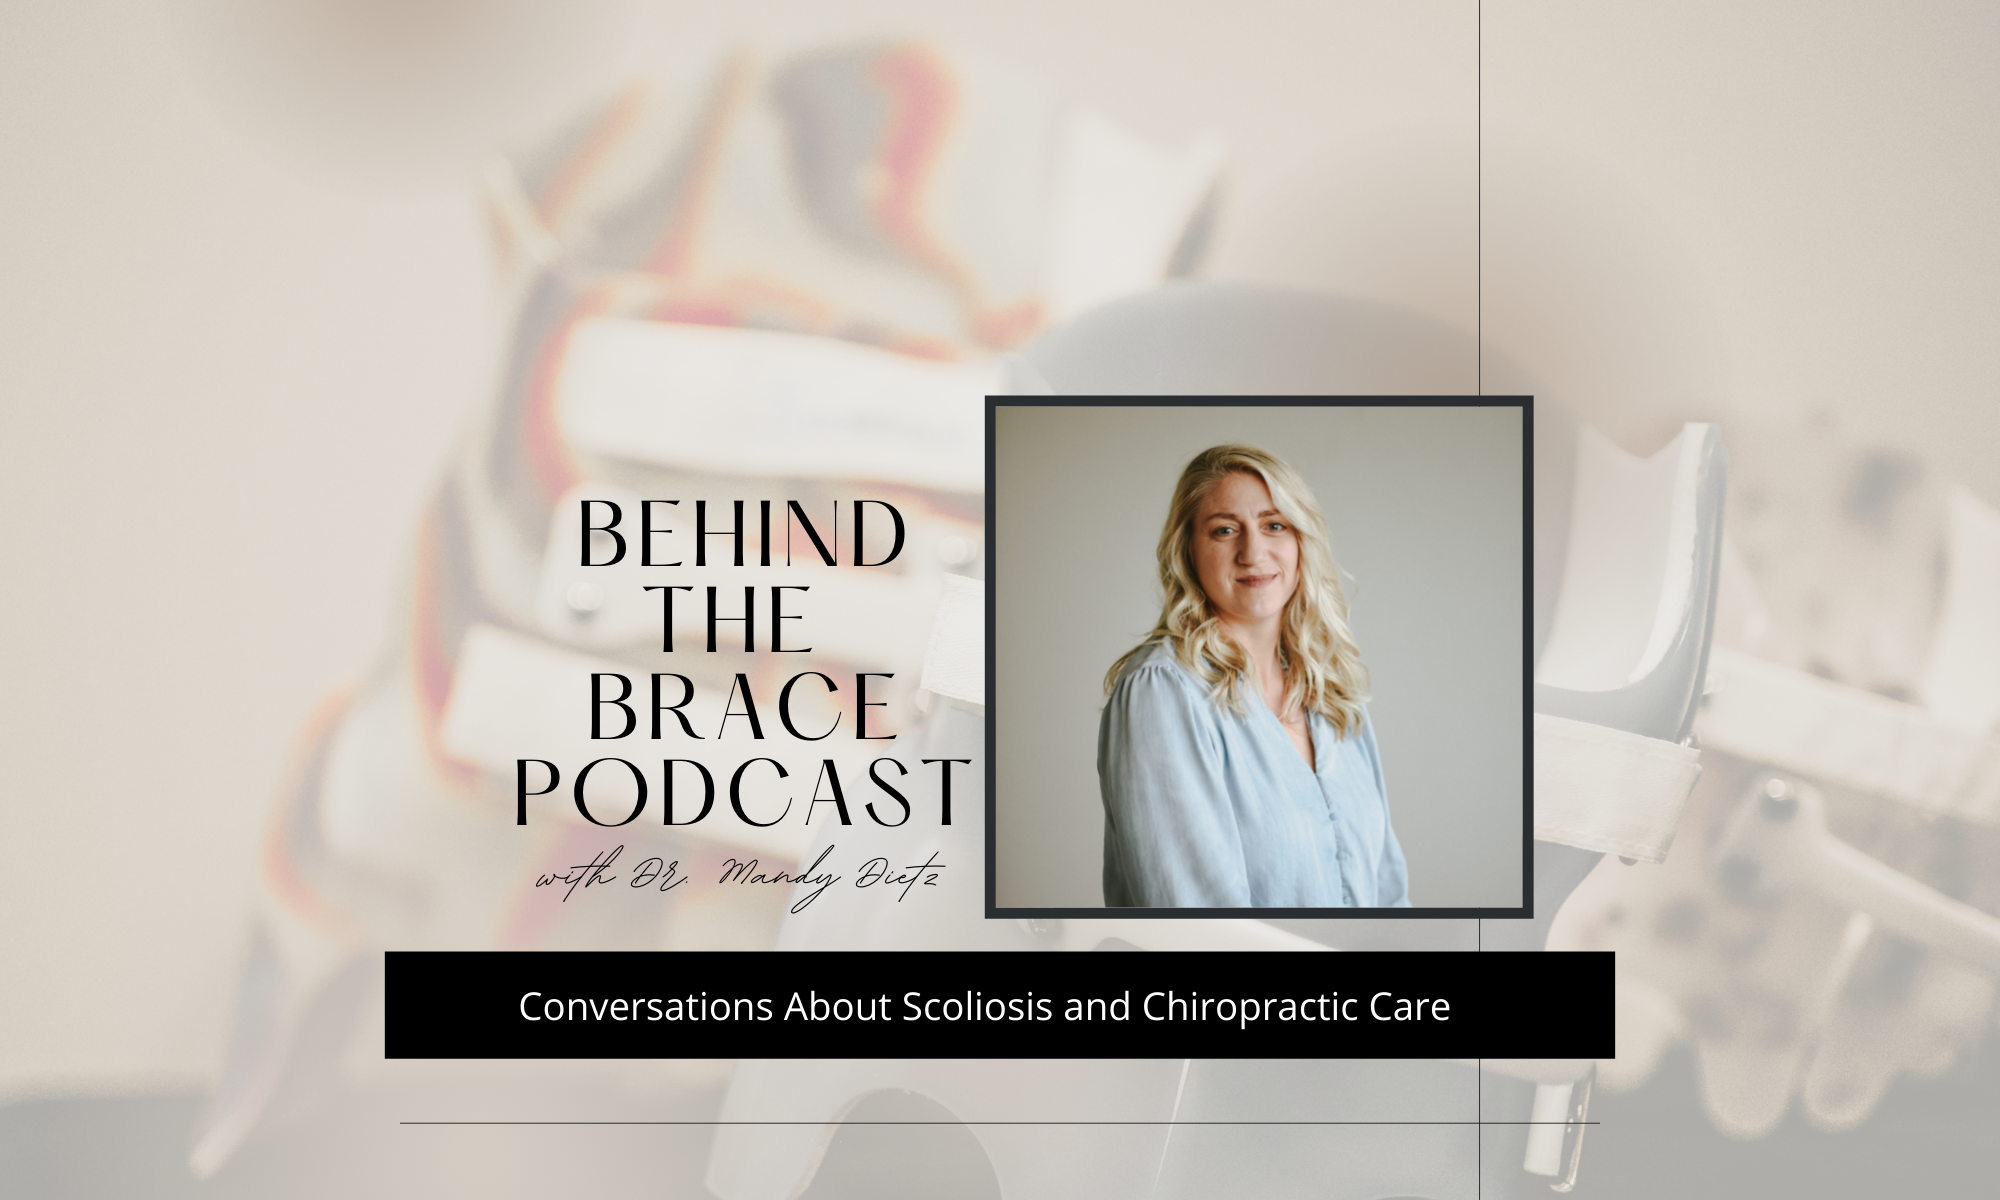 Behind the Brace Podcast, Episode 35: What You Need To Know About Pregnancy and Scoliosis